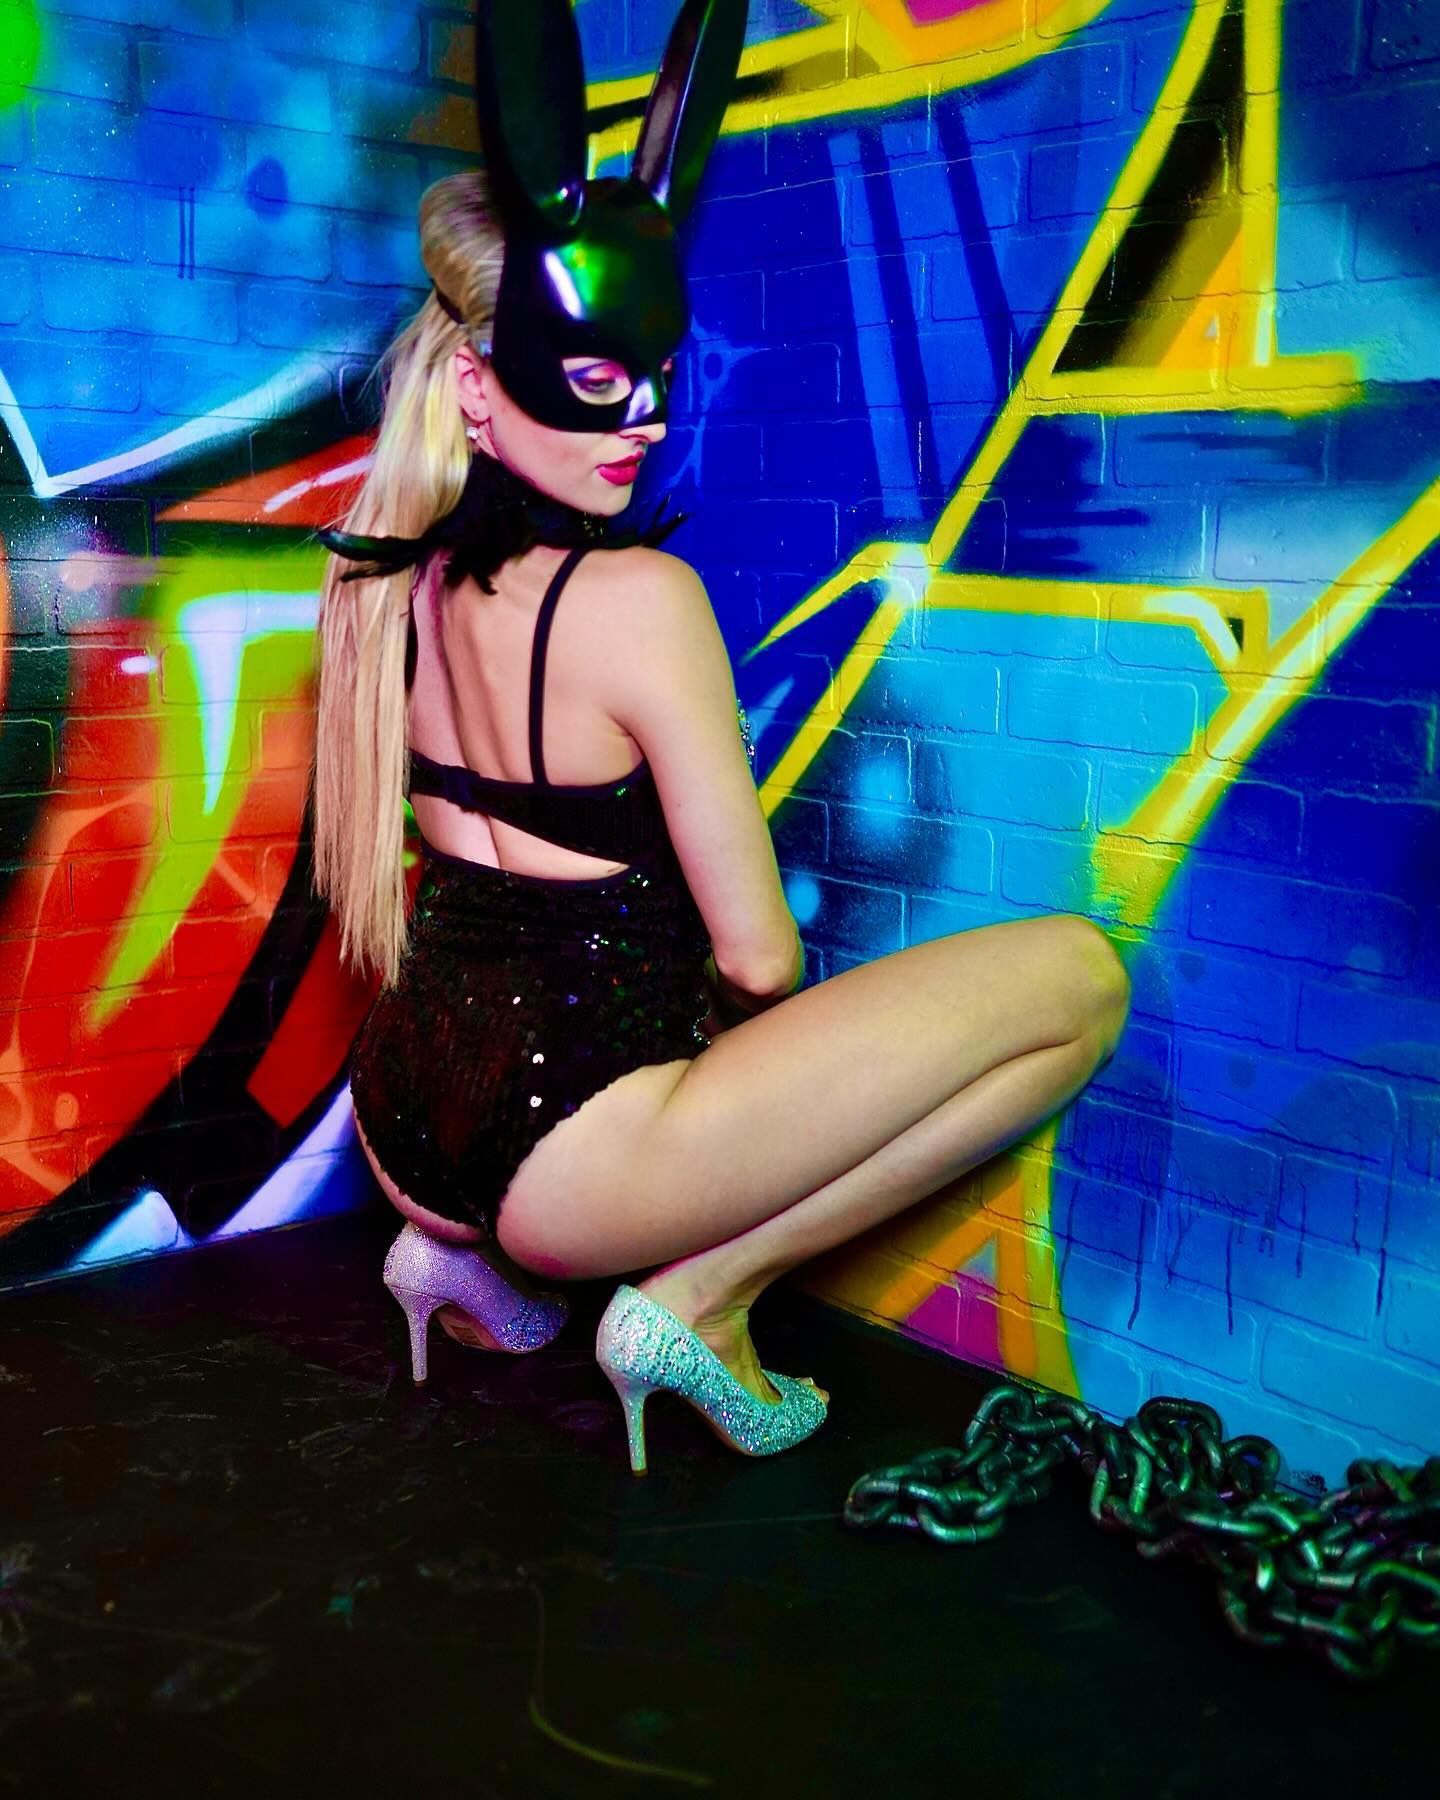 Channeling my inner bad bunny 🖤🐰 Retro to my first visit to @gw_burns_photography studio 2021 ⛓️
📸 @legal.lens.mc